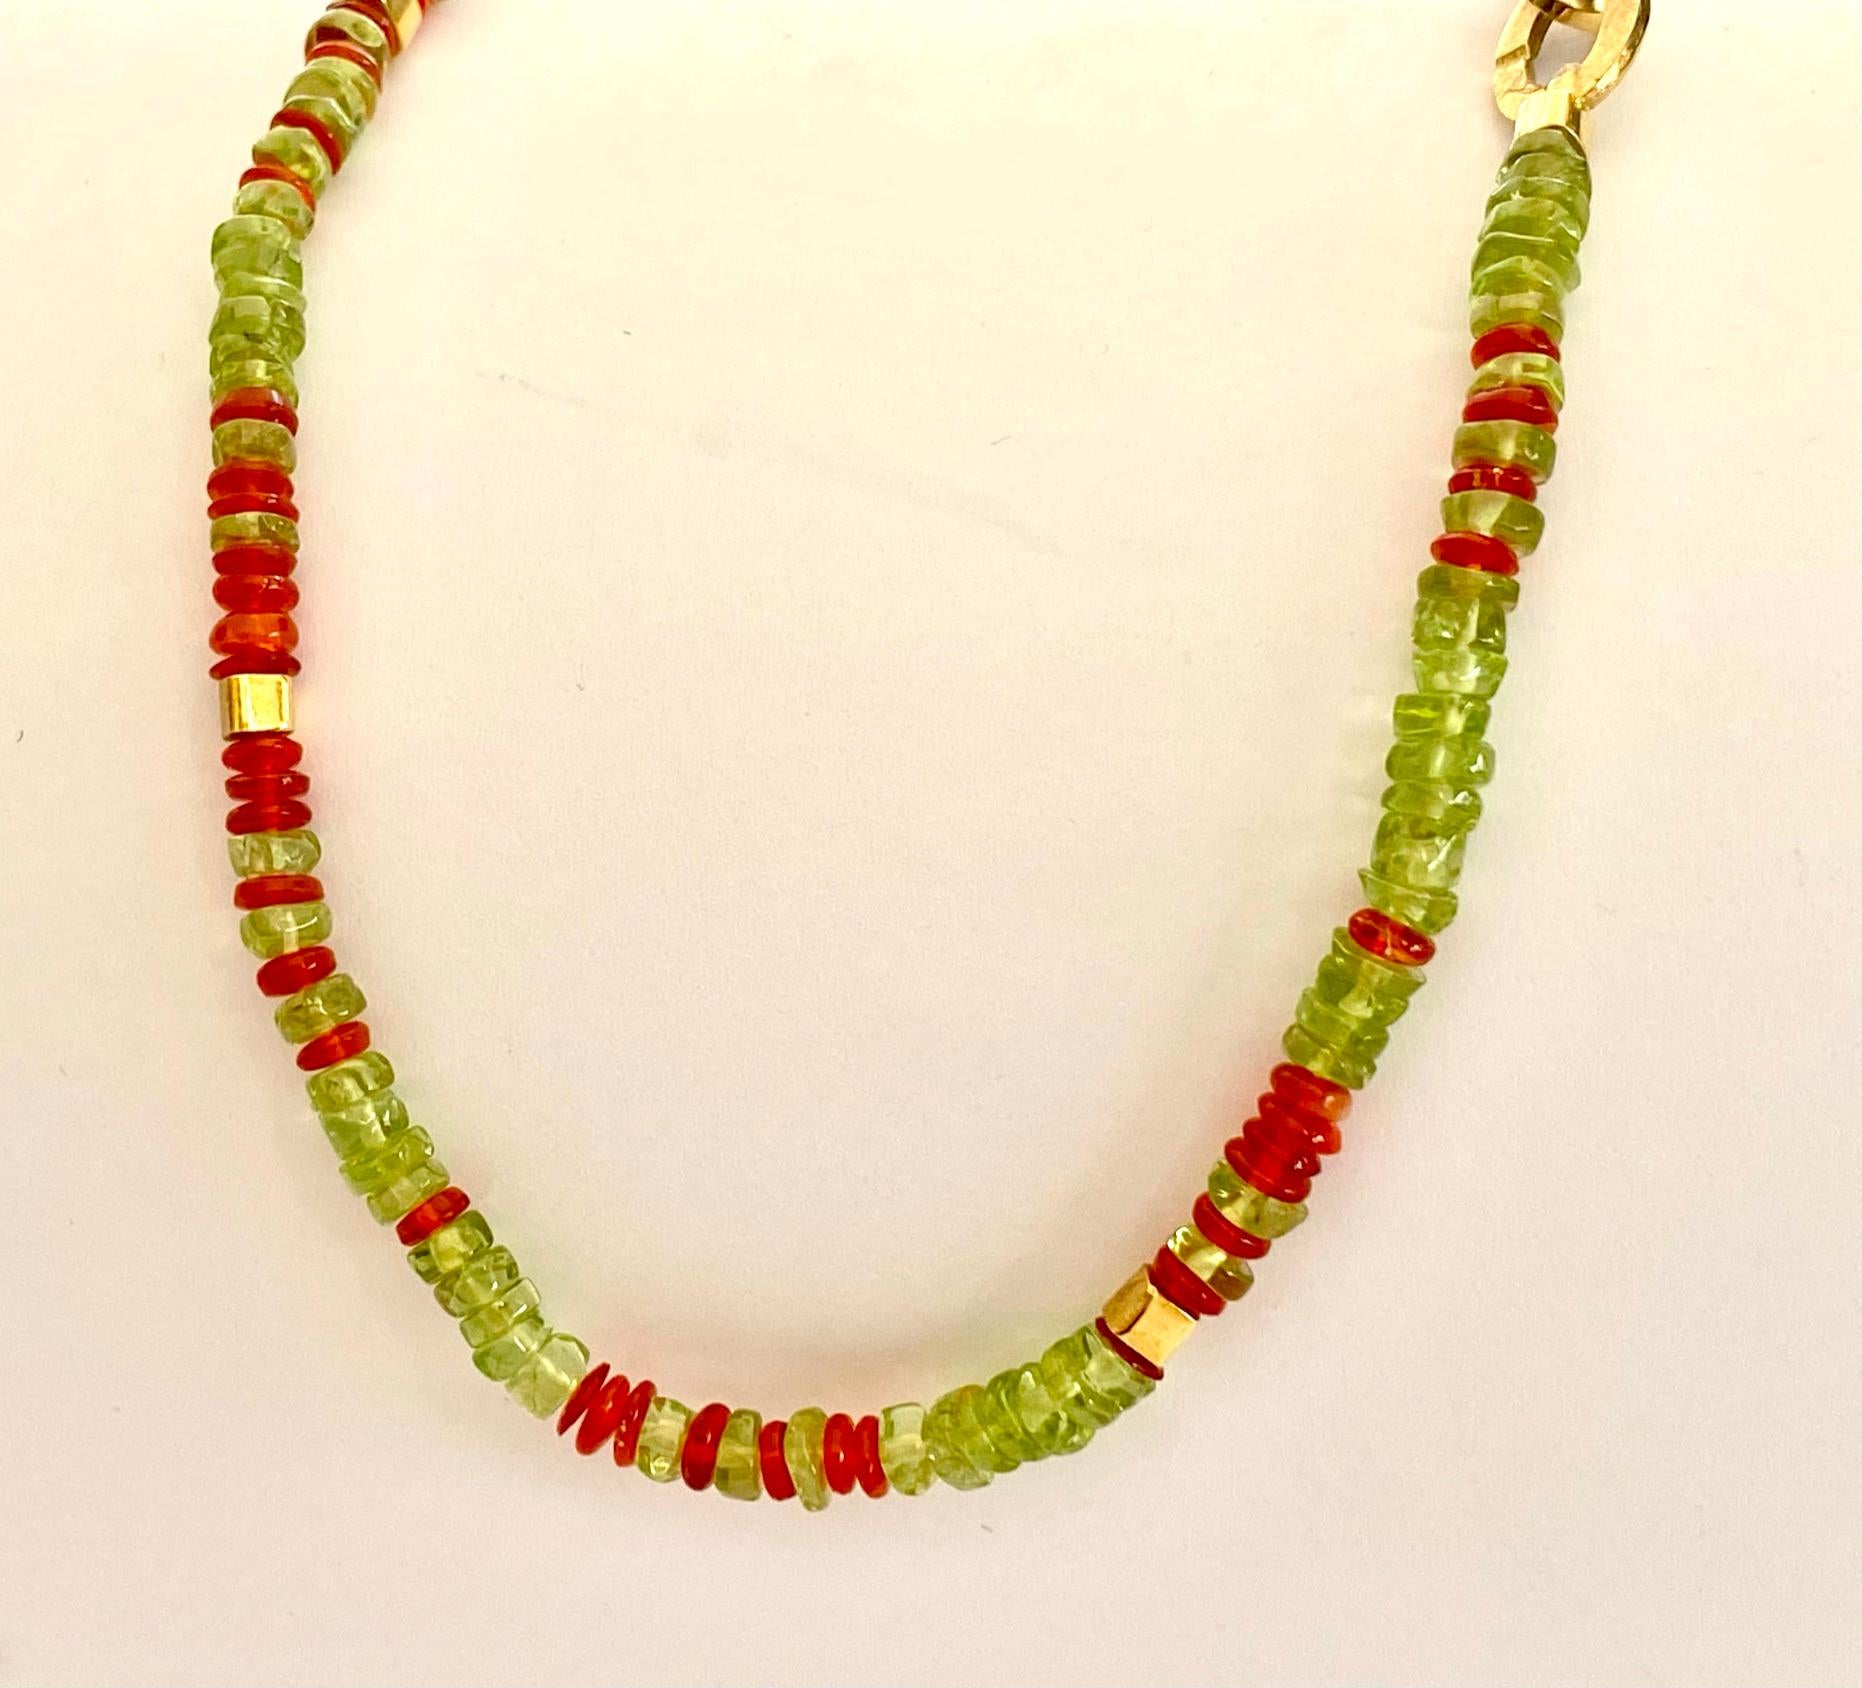 One (1) Colored Stone Necklace with 18 Karat Yellow Gold Lock and Cubic Beads.
This Necklace is set with Natural Peridots and Natural Fire Opals.
Hand made and one of a kind.  (Germany, Idar Oberstein 2015)
Special 18K. Yellow Gold Lock.
Lenghts: 44